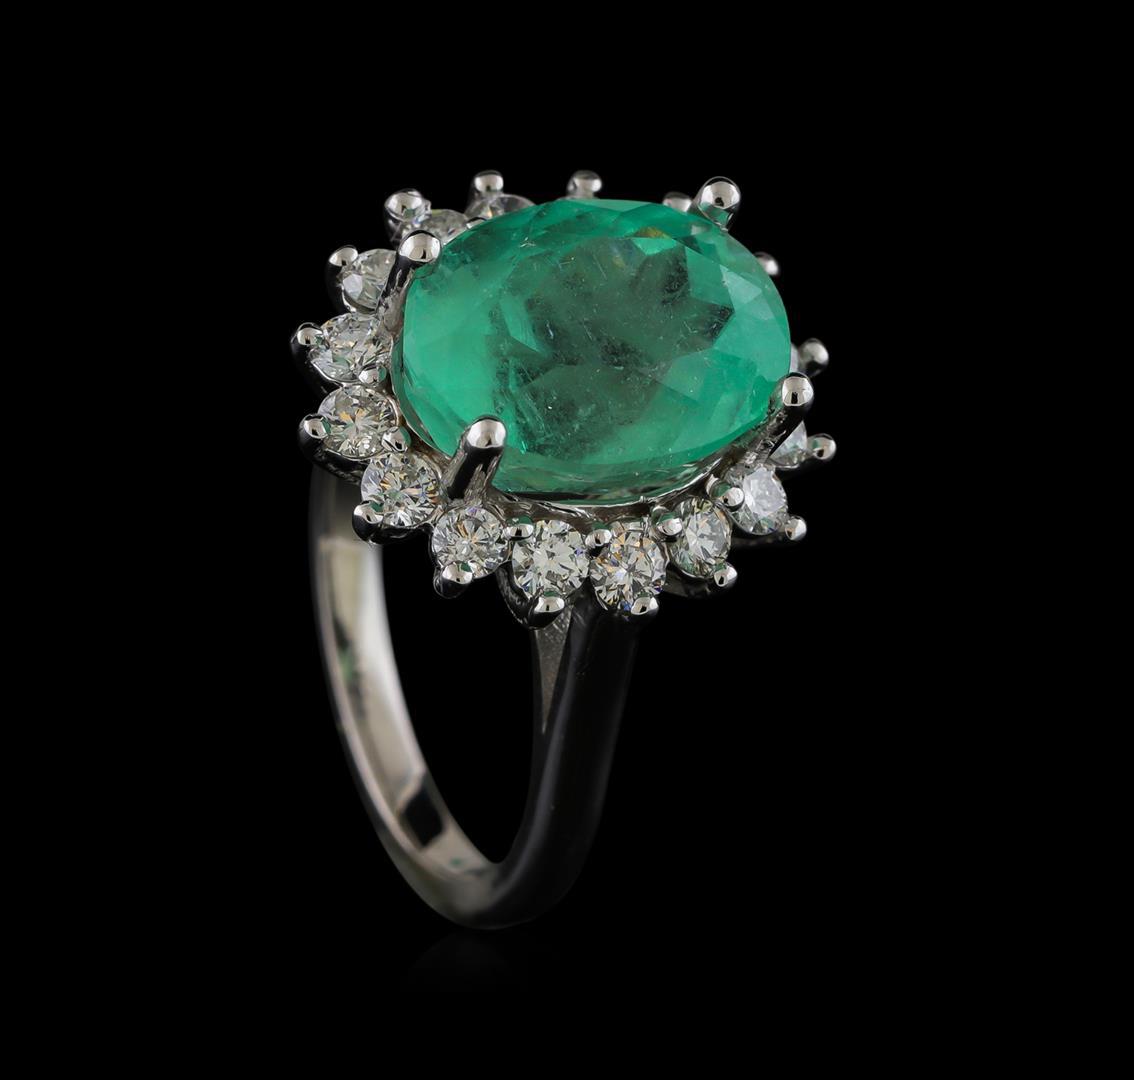 5.89 ctw Emerald and Diamond Ring - 14KT White Gold